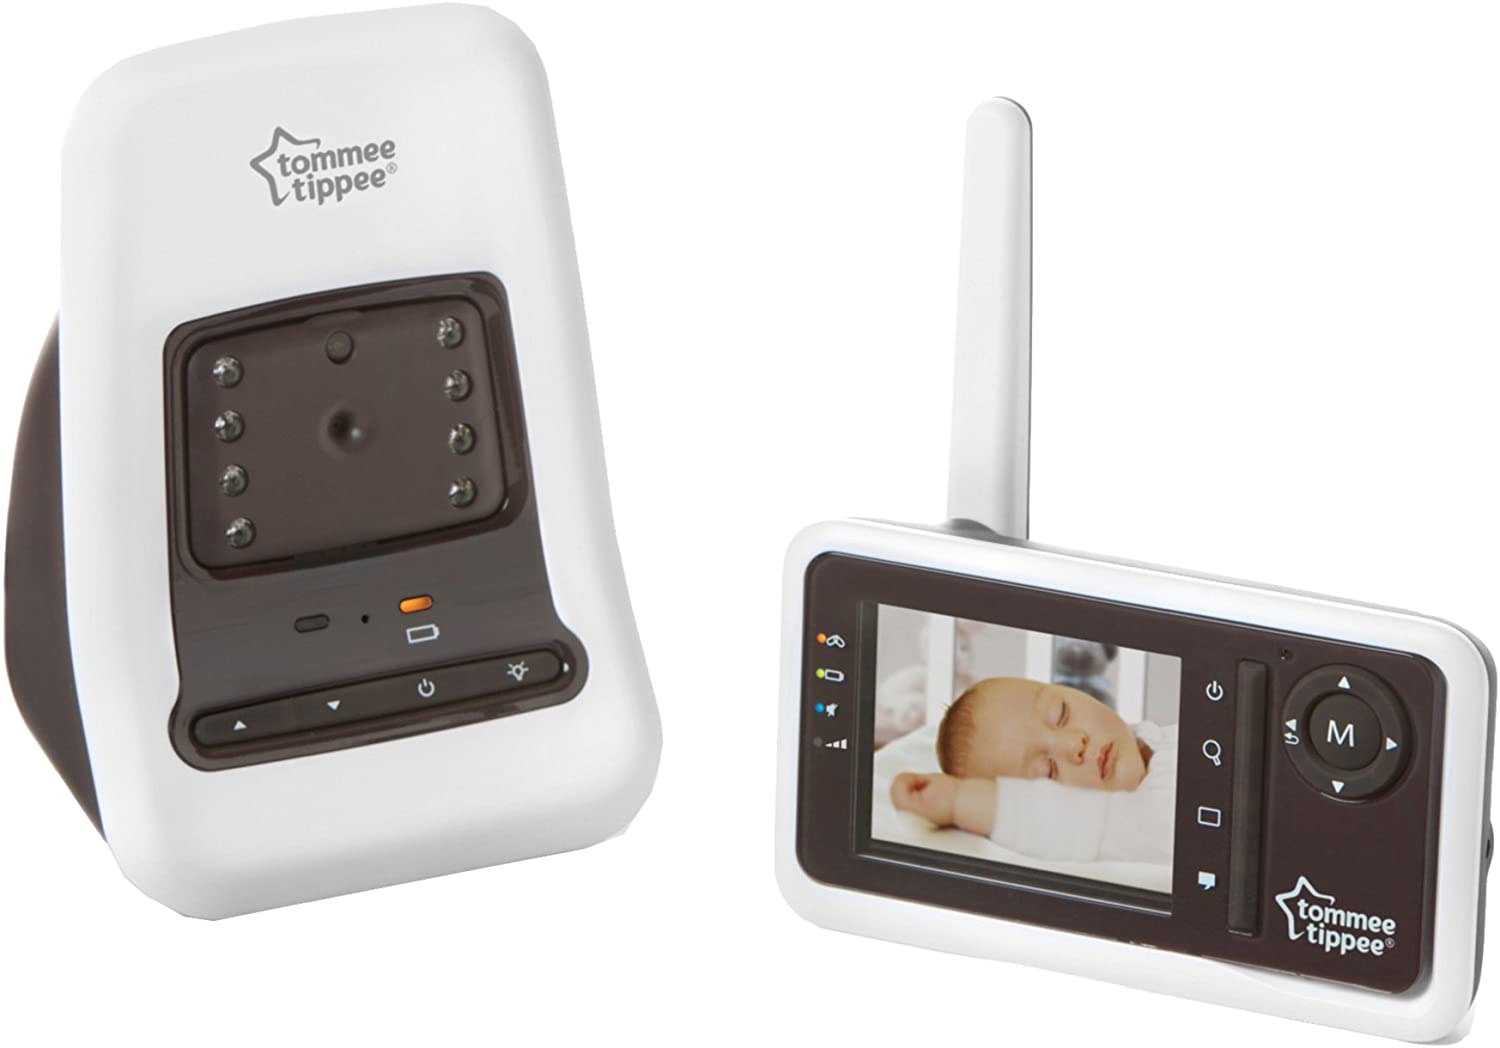 Tommee Tippee 1094S Digital Video Monitor With Movement Sensor Pad Instruction Manual